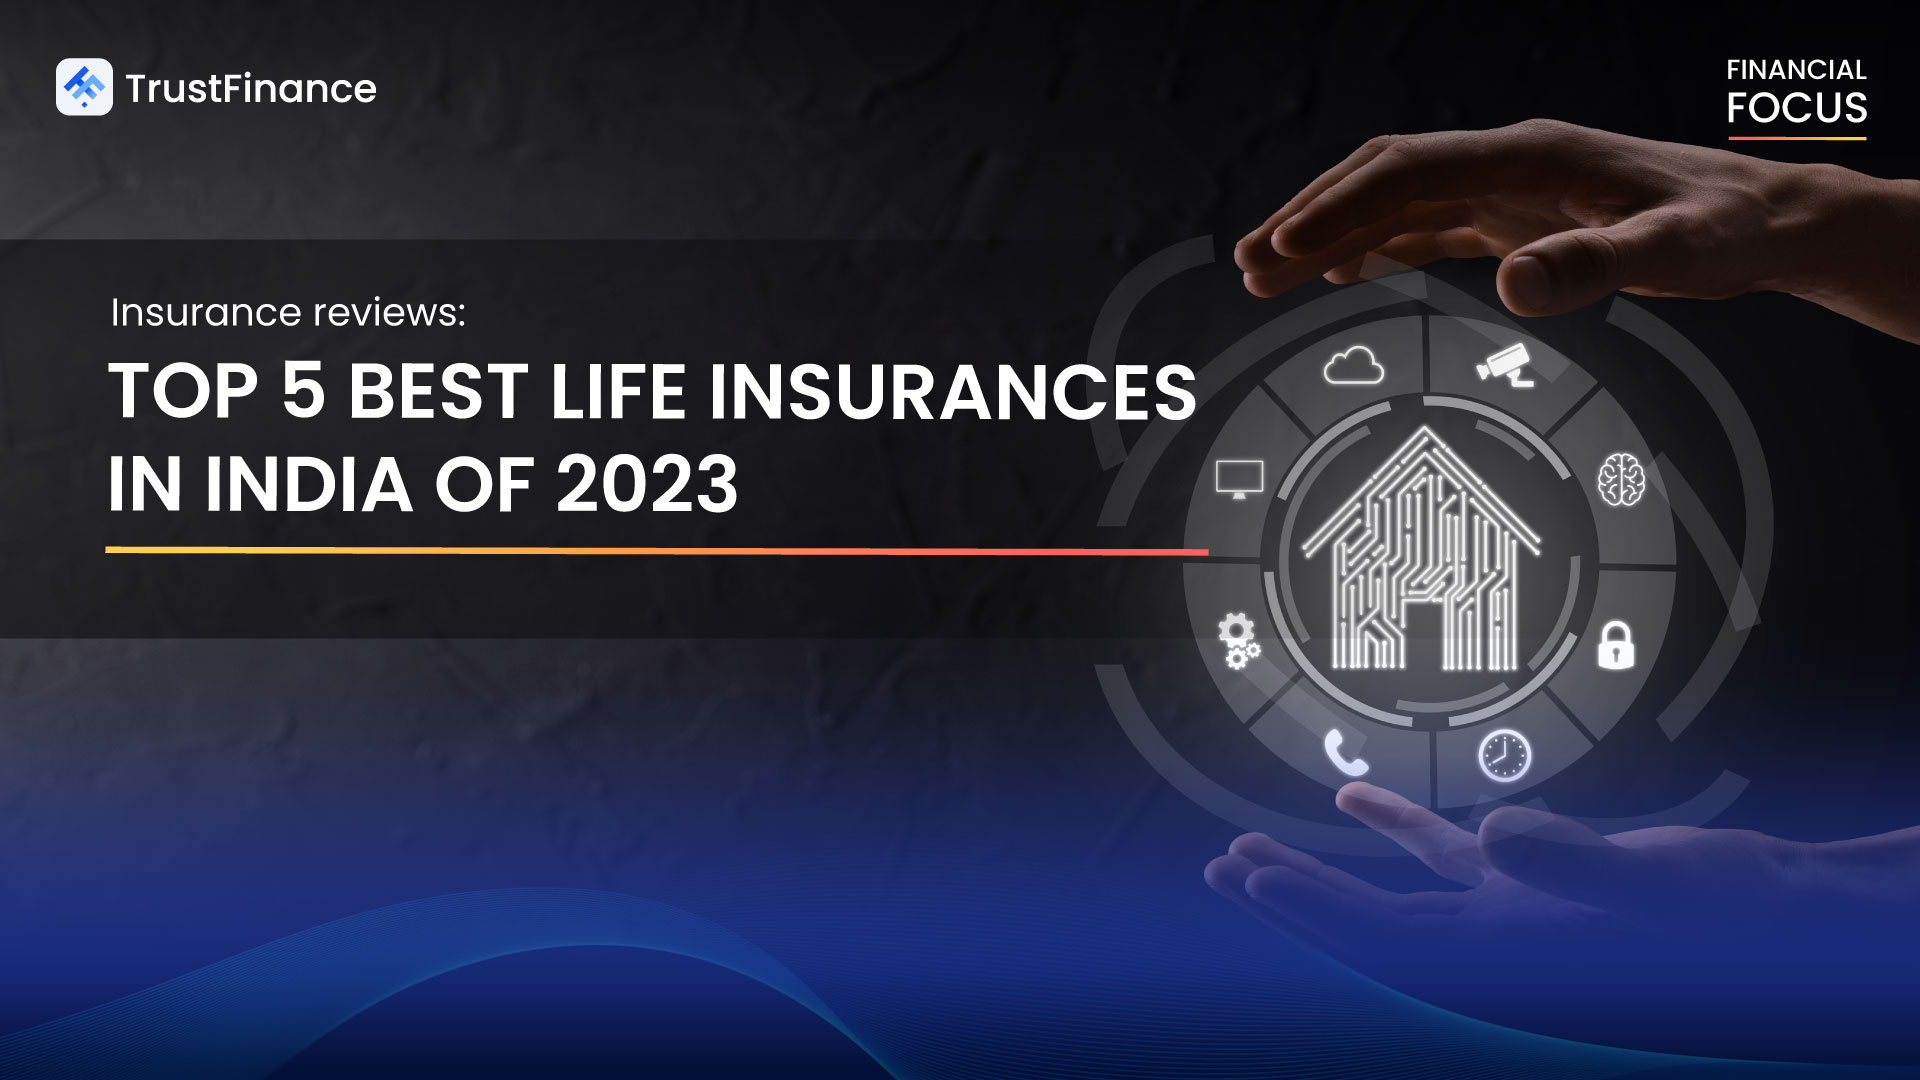 Insurance Review: Top 5 Best Life Insurances in India of 2023